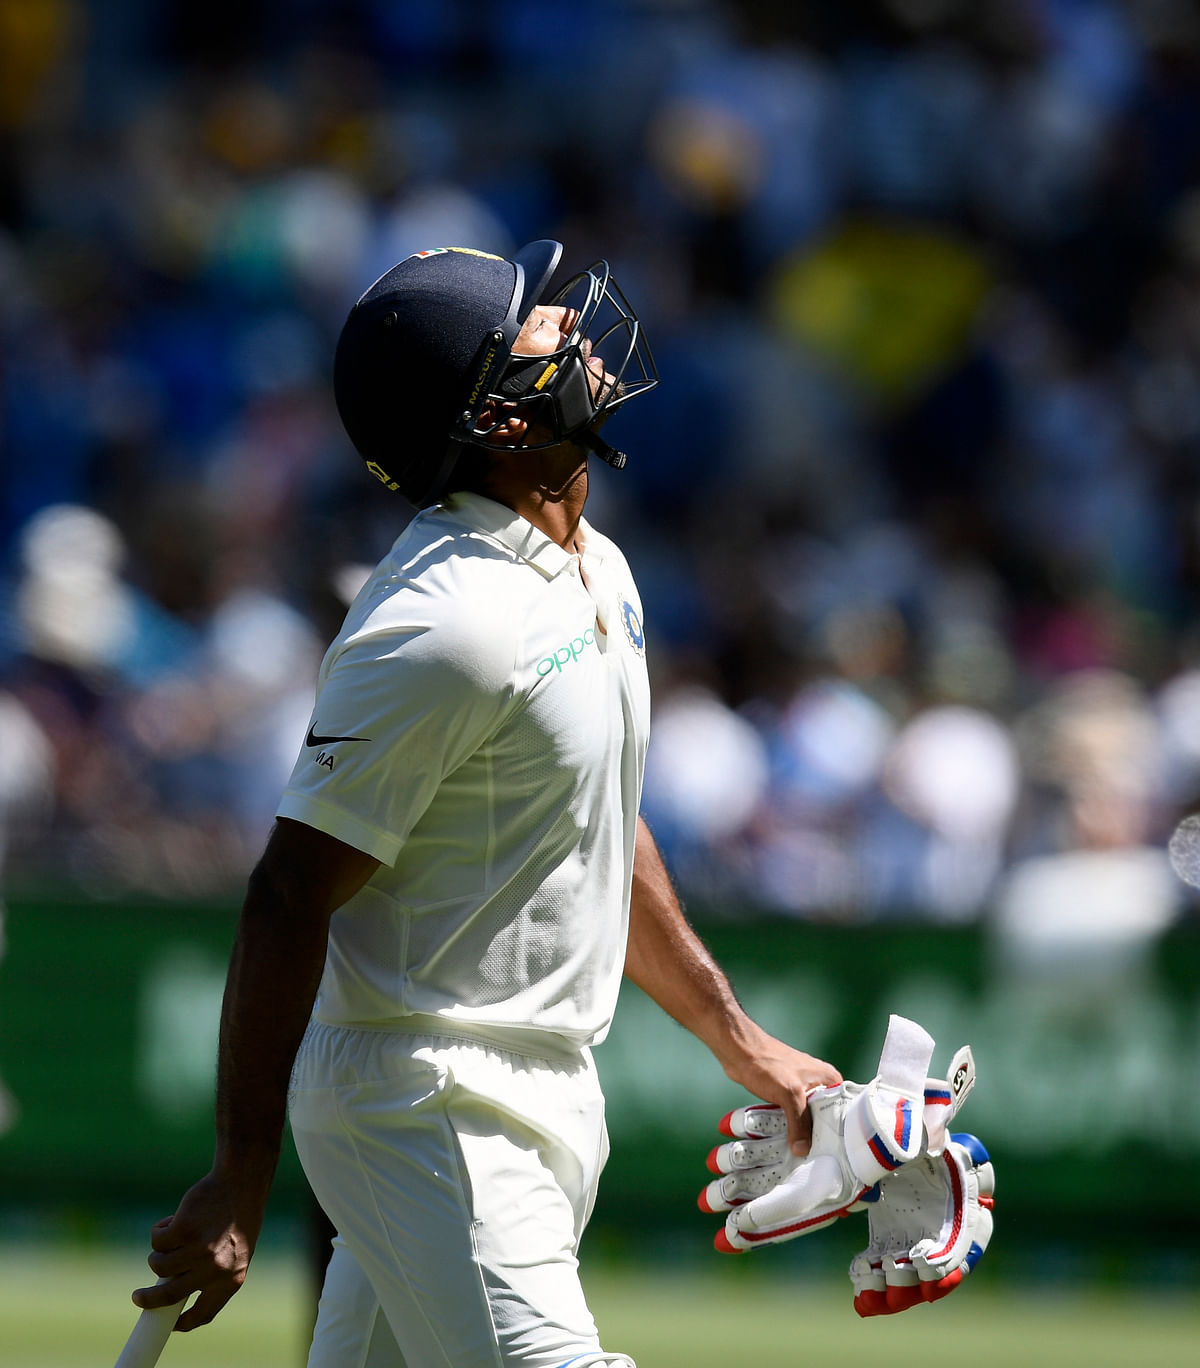 Riding on Mayank Agarwal’s 76, India posted 215/2 on Day 1 of the Boxing Day Test against Australia.